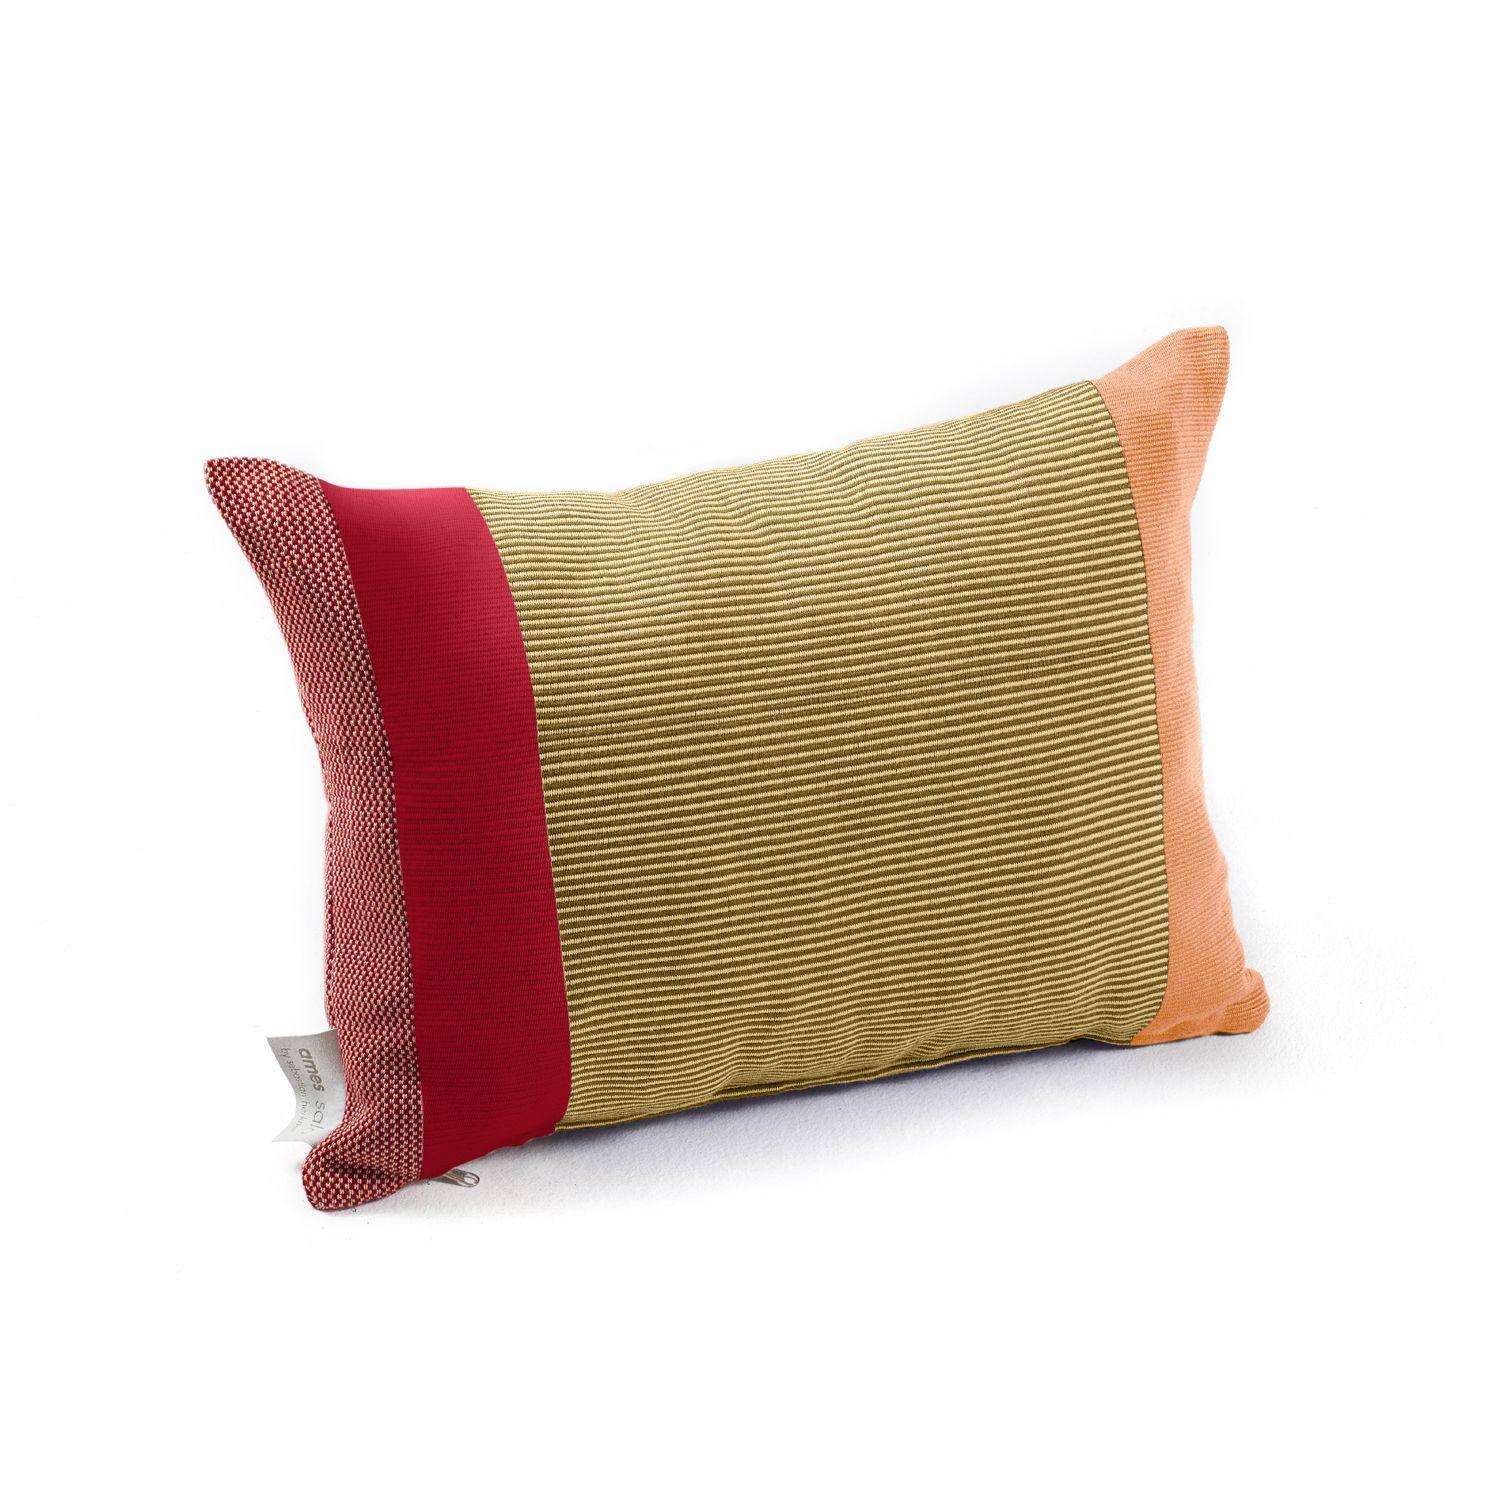 With their strong colour-blocking, the Maraca Cushions are an ode to the rich cultural heritage of the Bolívar region in Northern Colombia. In this area, the old manufacturing techniques and methods are still cherished and taught. Among these is the